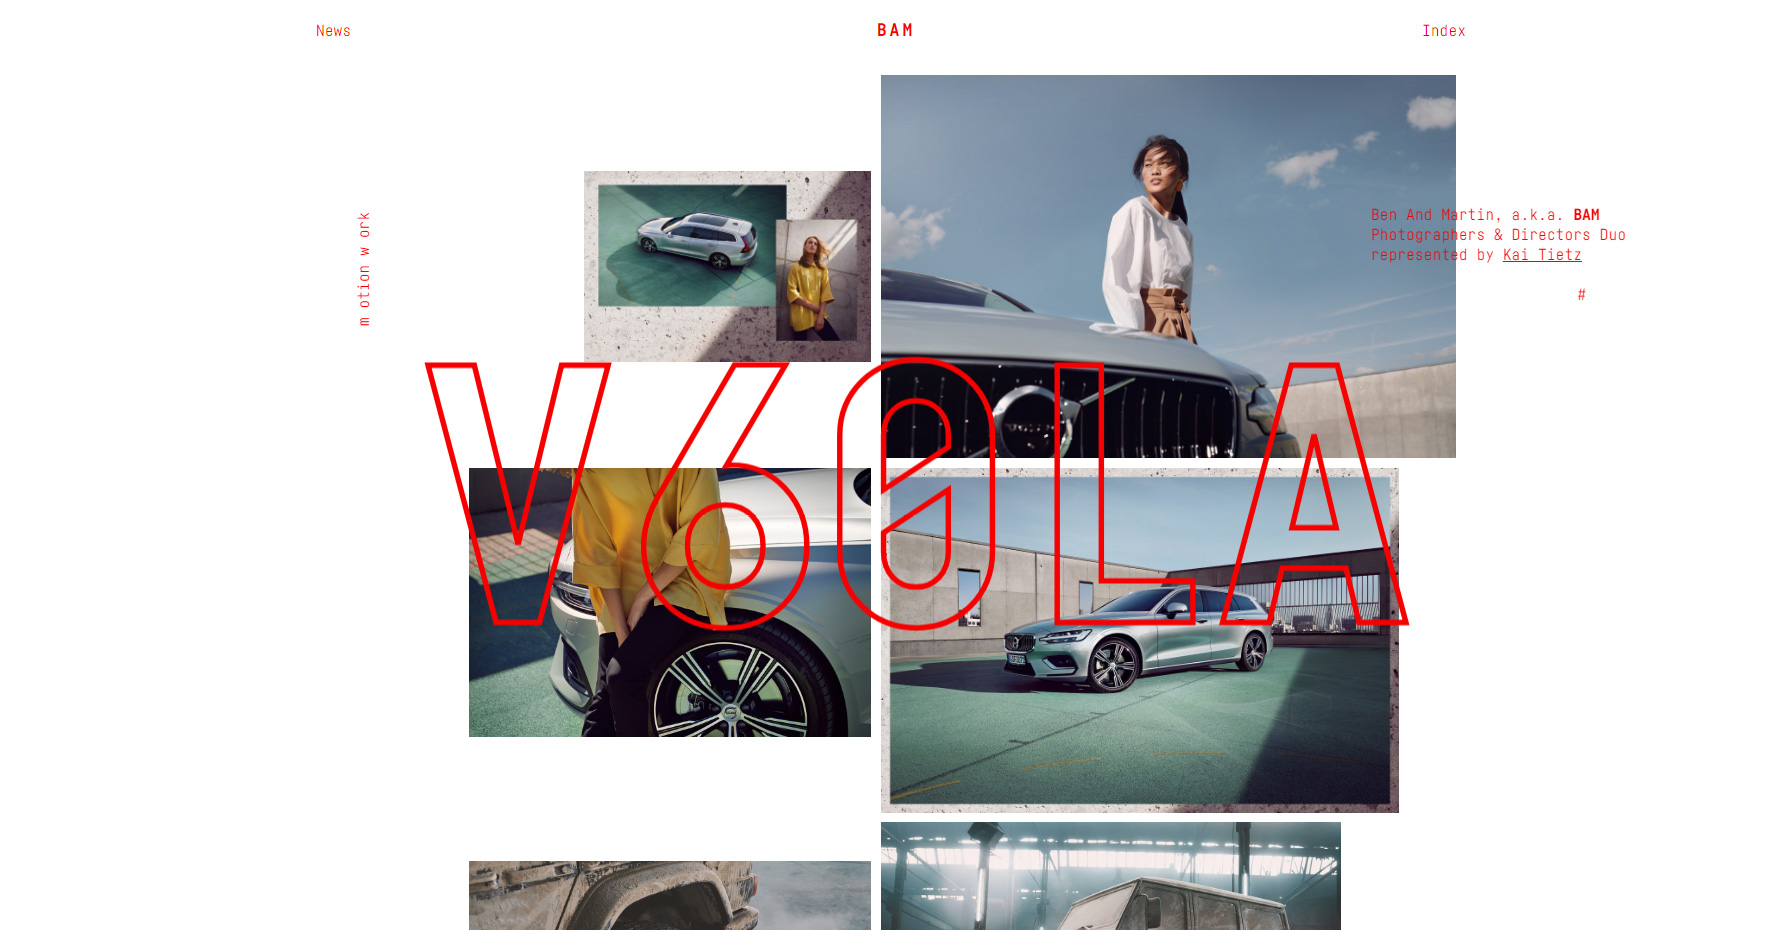 BAM Photographers & Directors - Website of the Day